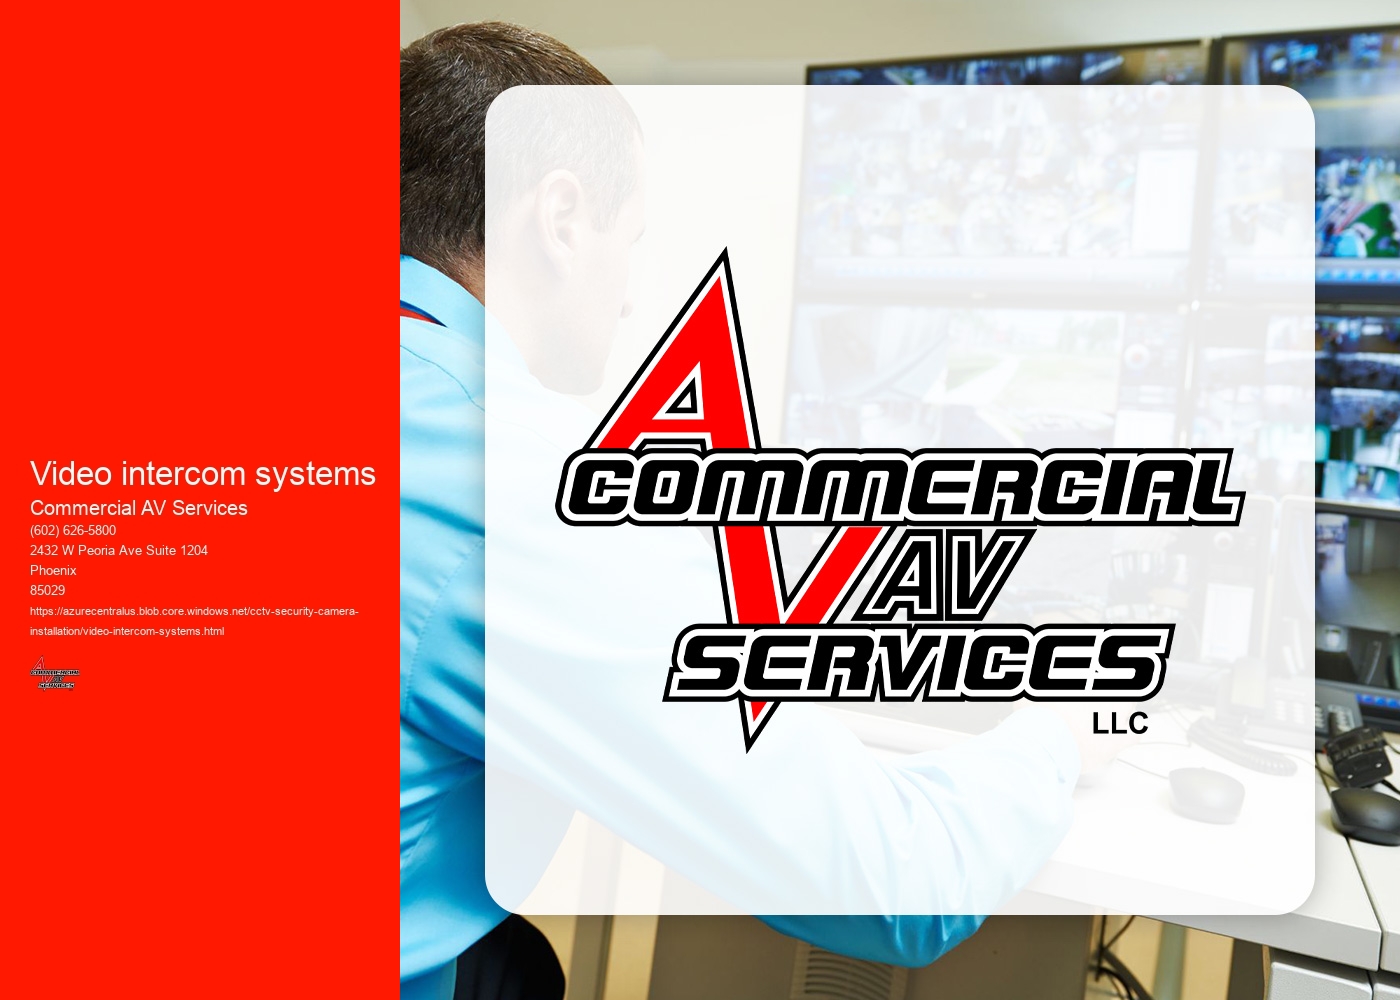 Can the video intercom system be integrated with access control systems for enhanced security?